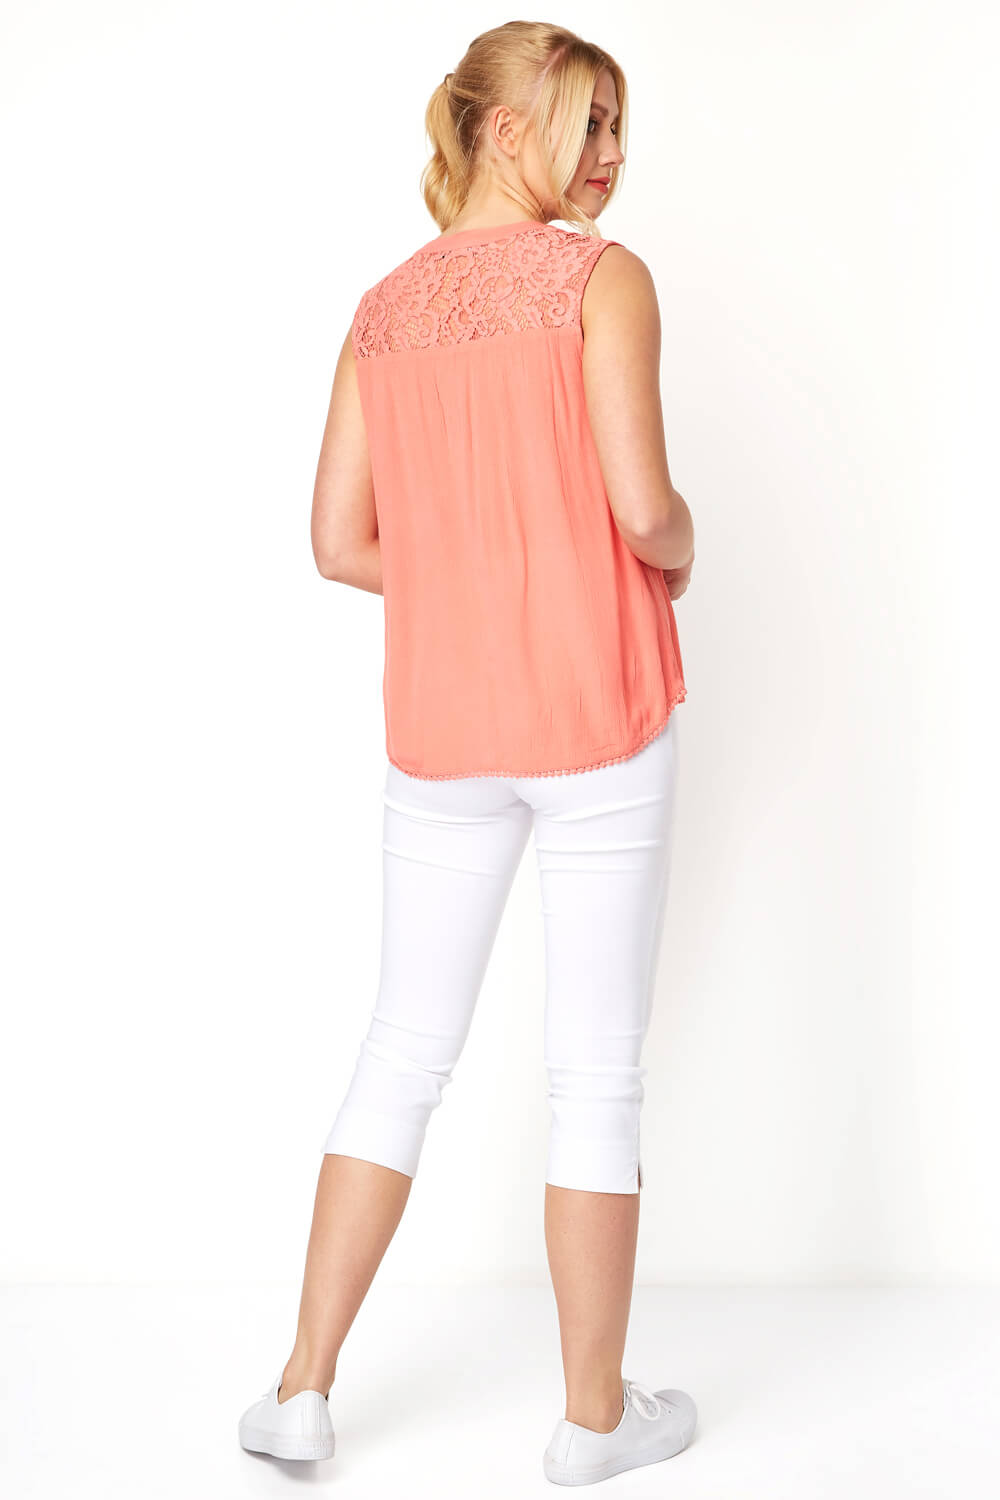 CORAL Lace Insert Button Up Blouse, Image 3 of 8